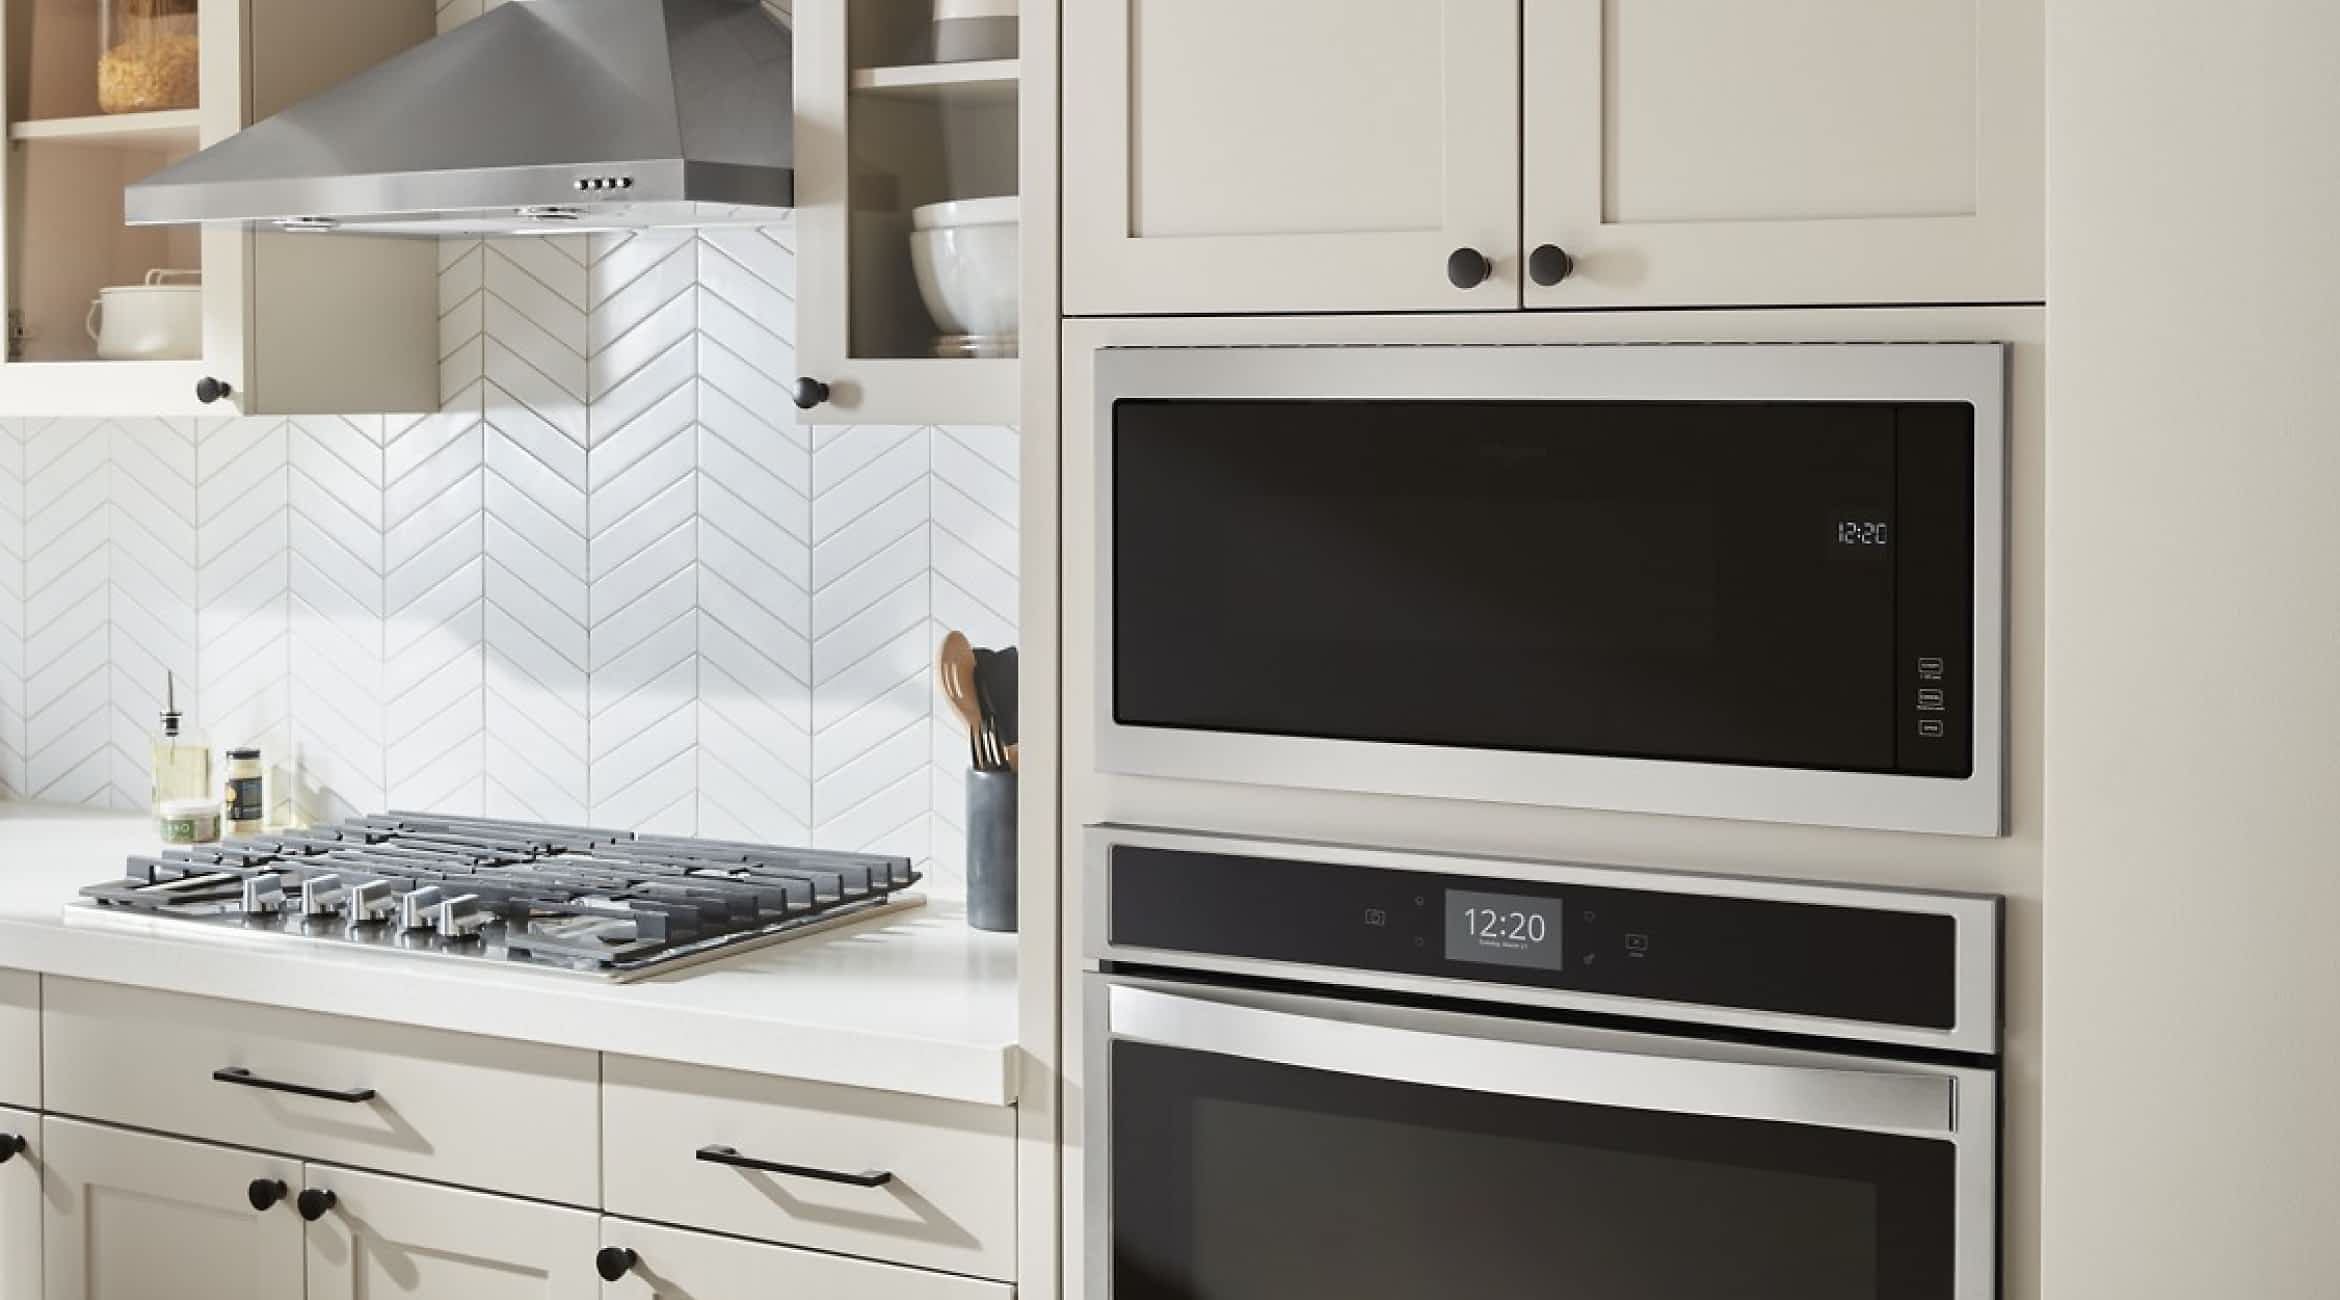 A Whirlpool® Built-In Microwave in a modern kitchen